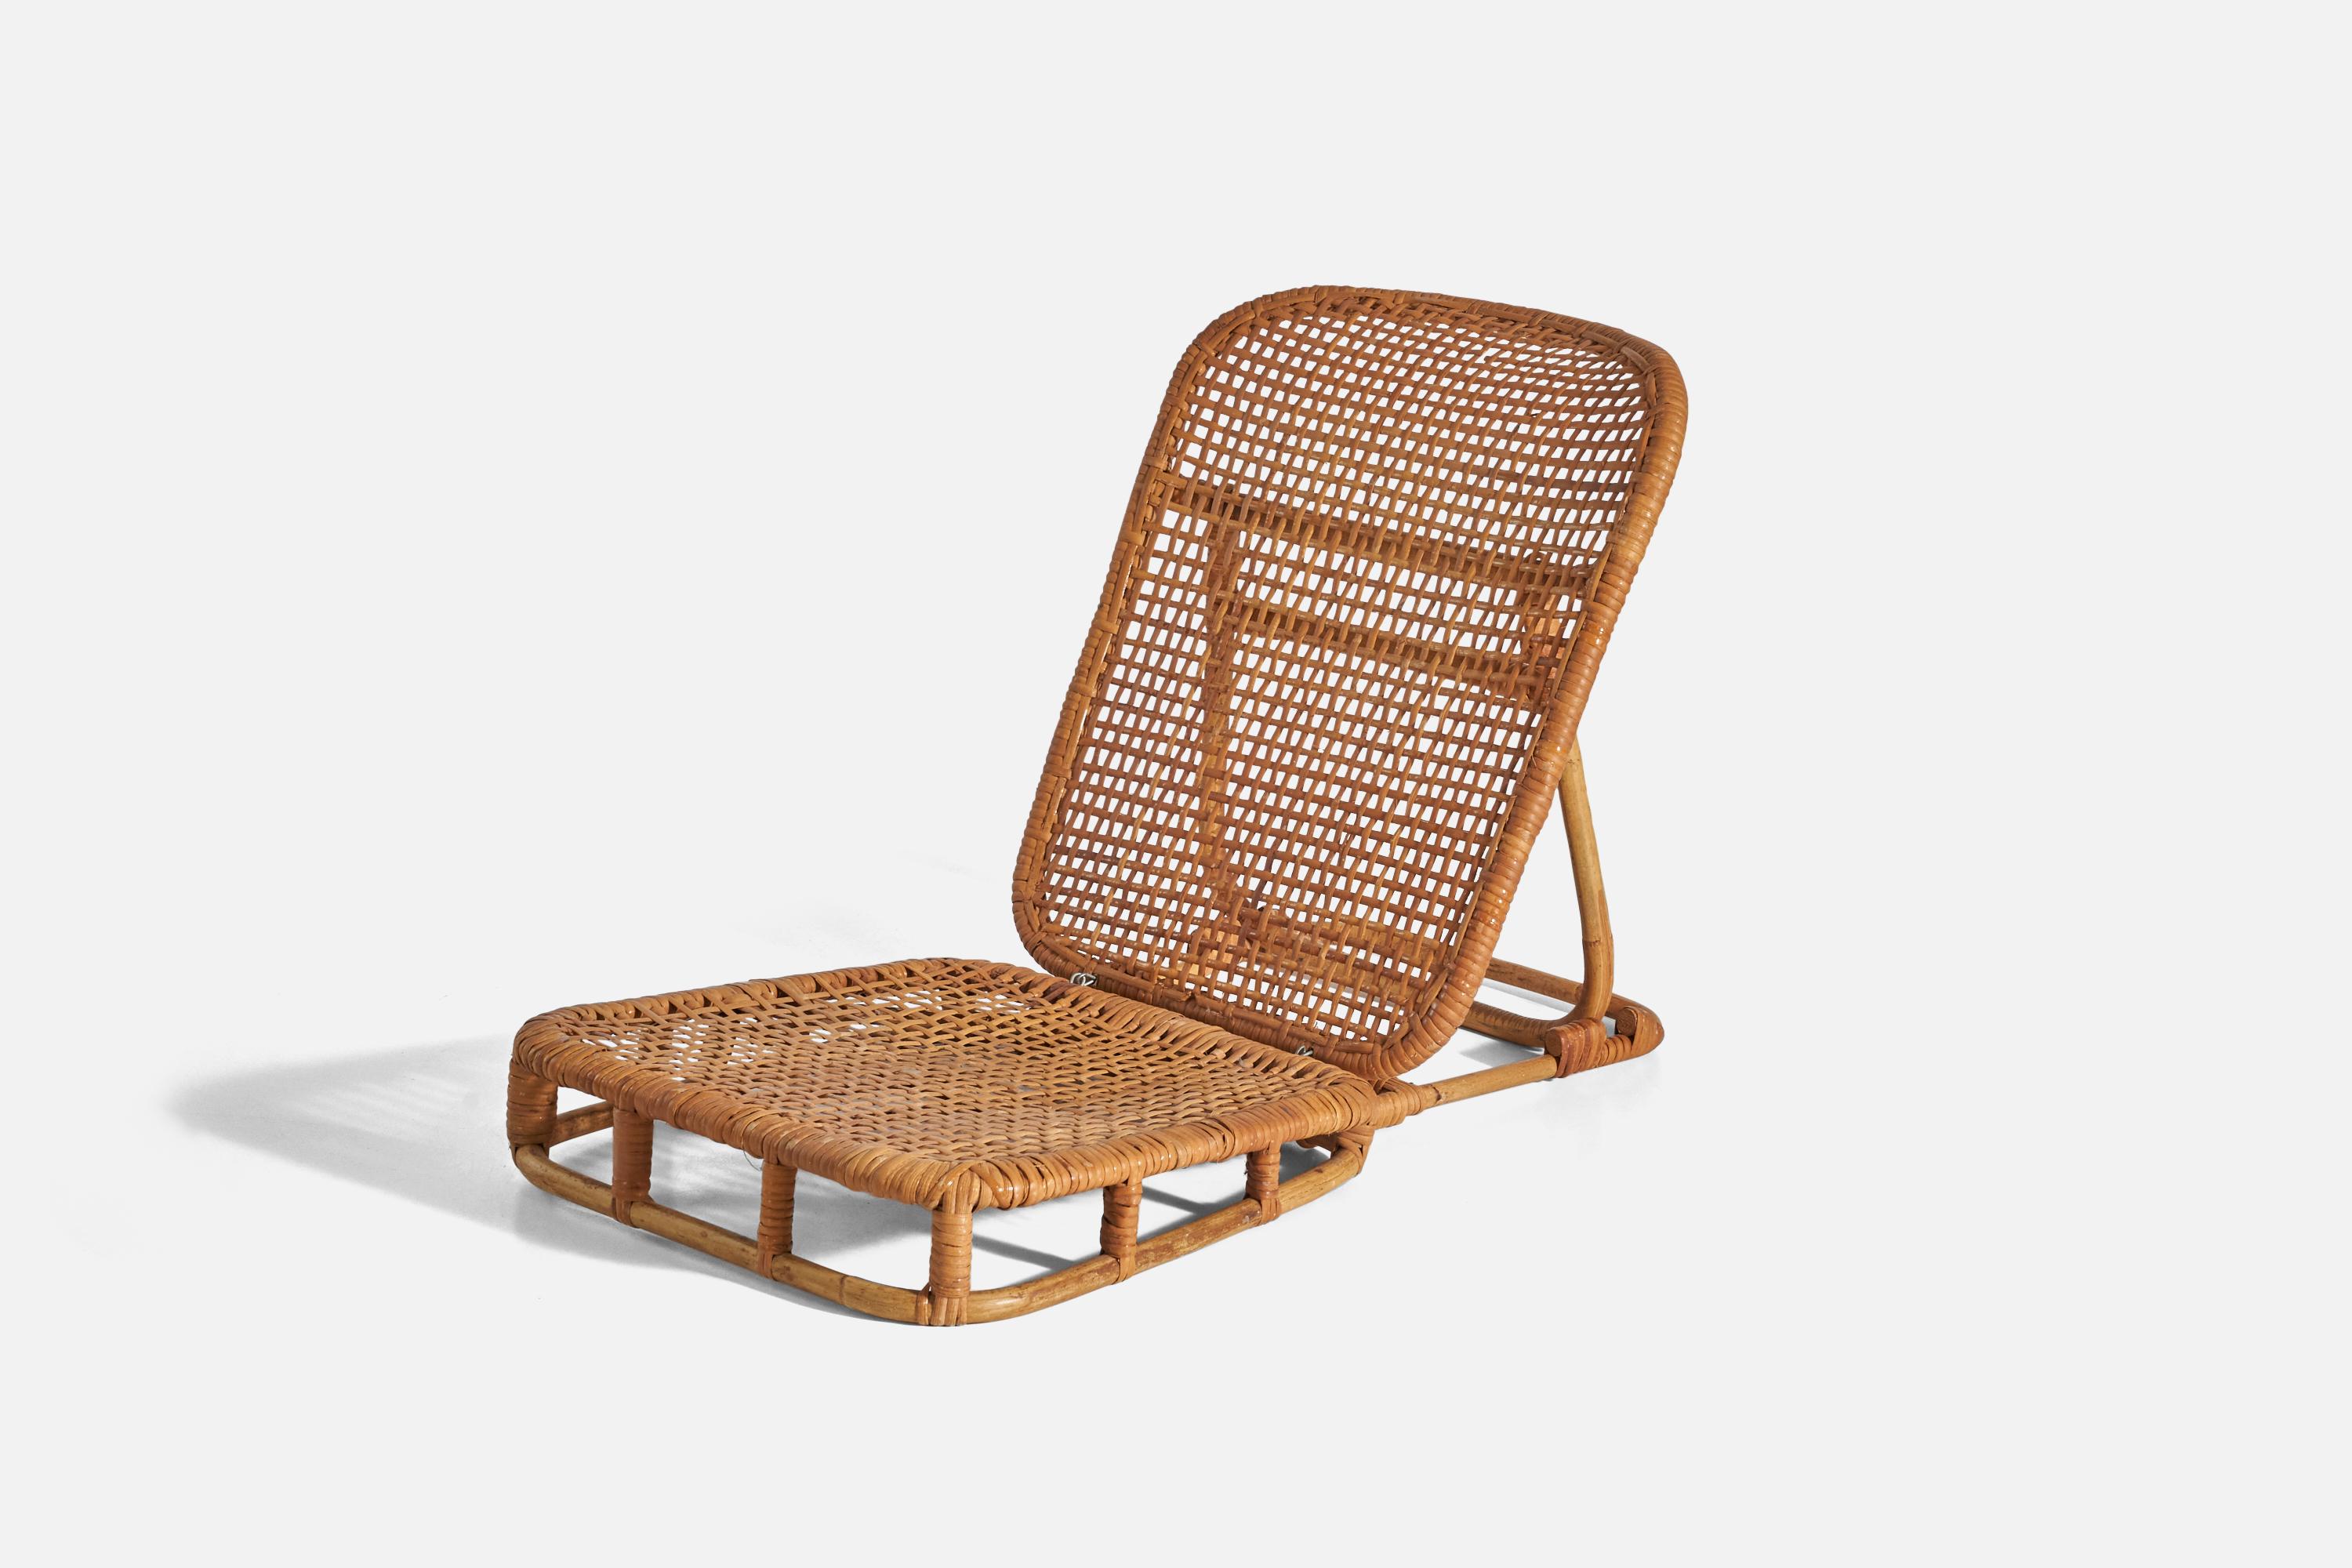 A rattan chair designed and produced by Calif-Asia, USA, c. 1960s.